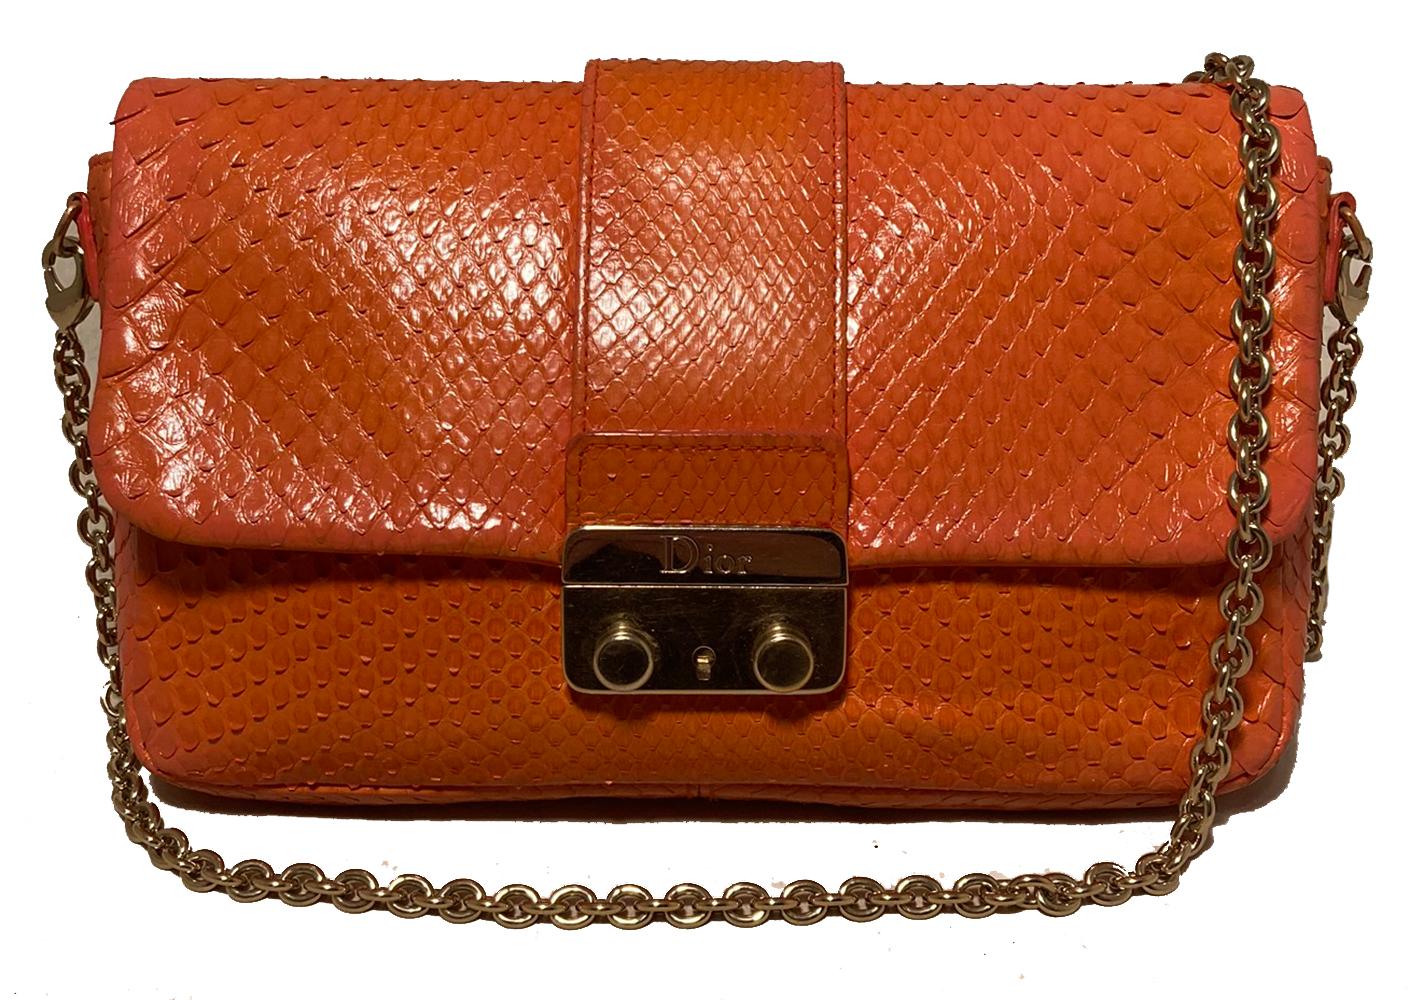 Christian Dior Orange Python Miss Dior Small Flap Bag in excellent condition. Orange python snakeskin exterior trimmed with gold hardware. Front pinch latch closure opens via single flap to an orange leather lined interior that holds one side slit